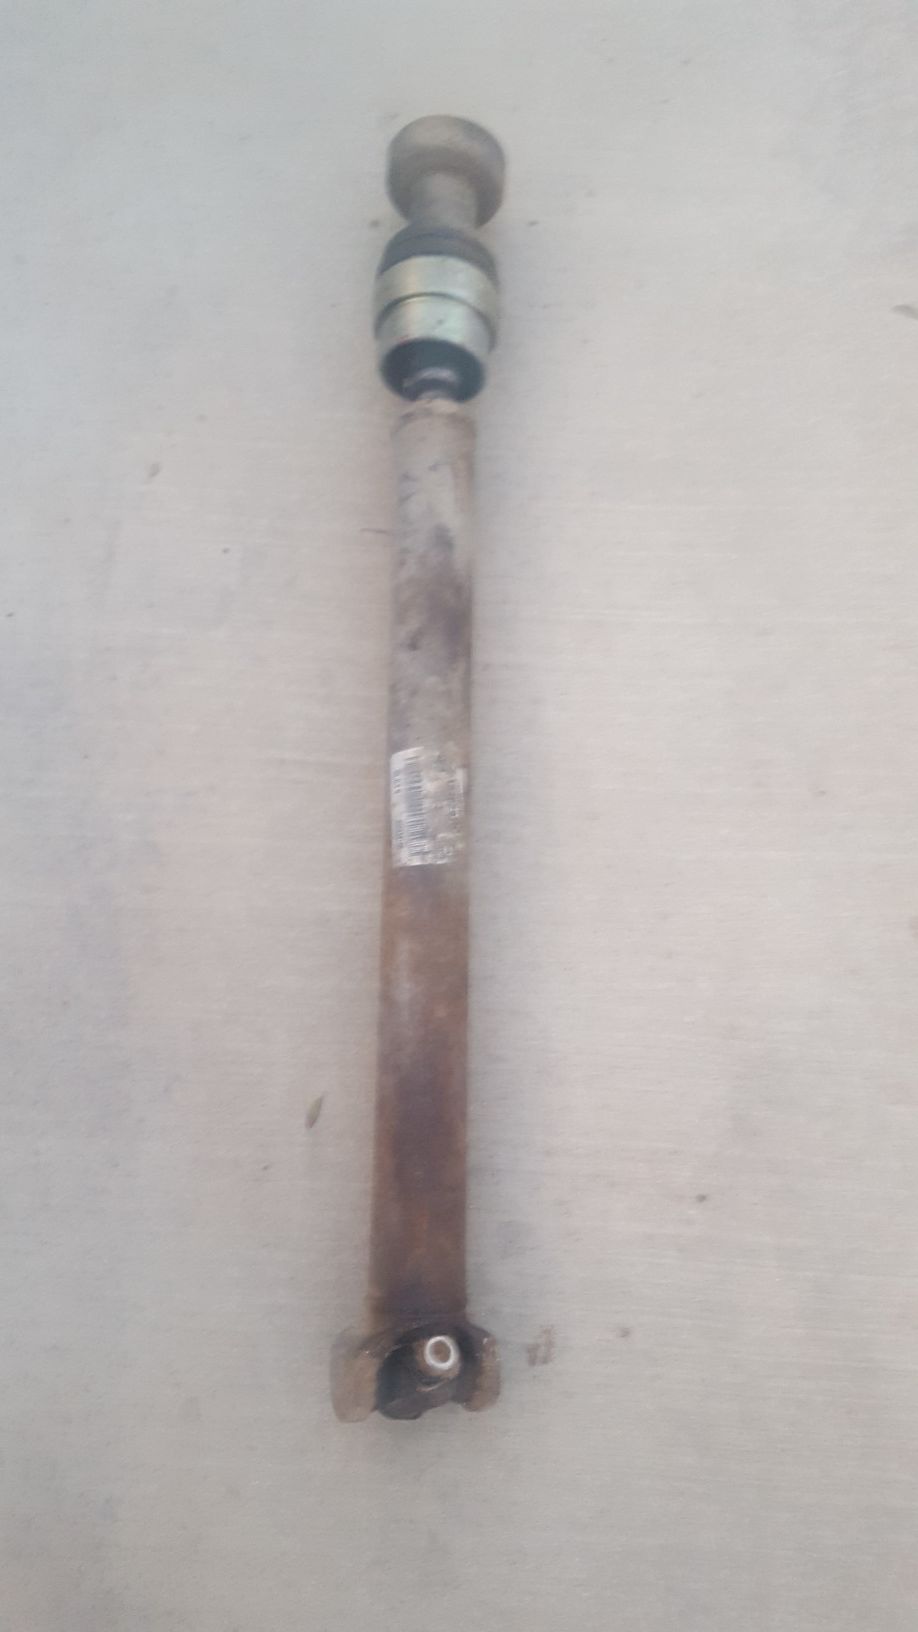 Chevy s10 4x4 front differential drive shaft for Sale in Hesperia, CA ...